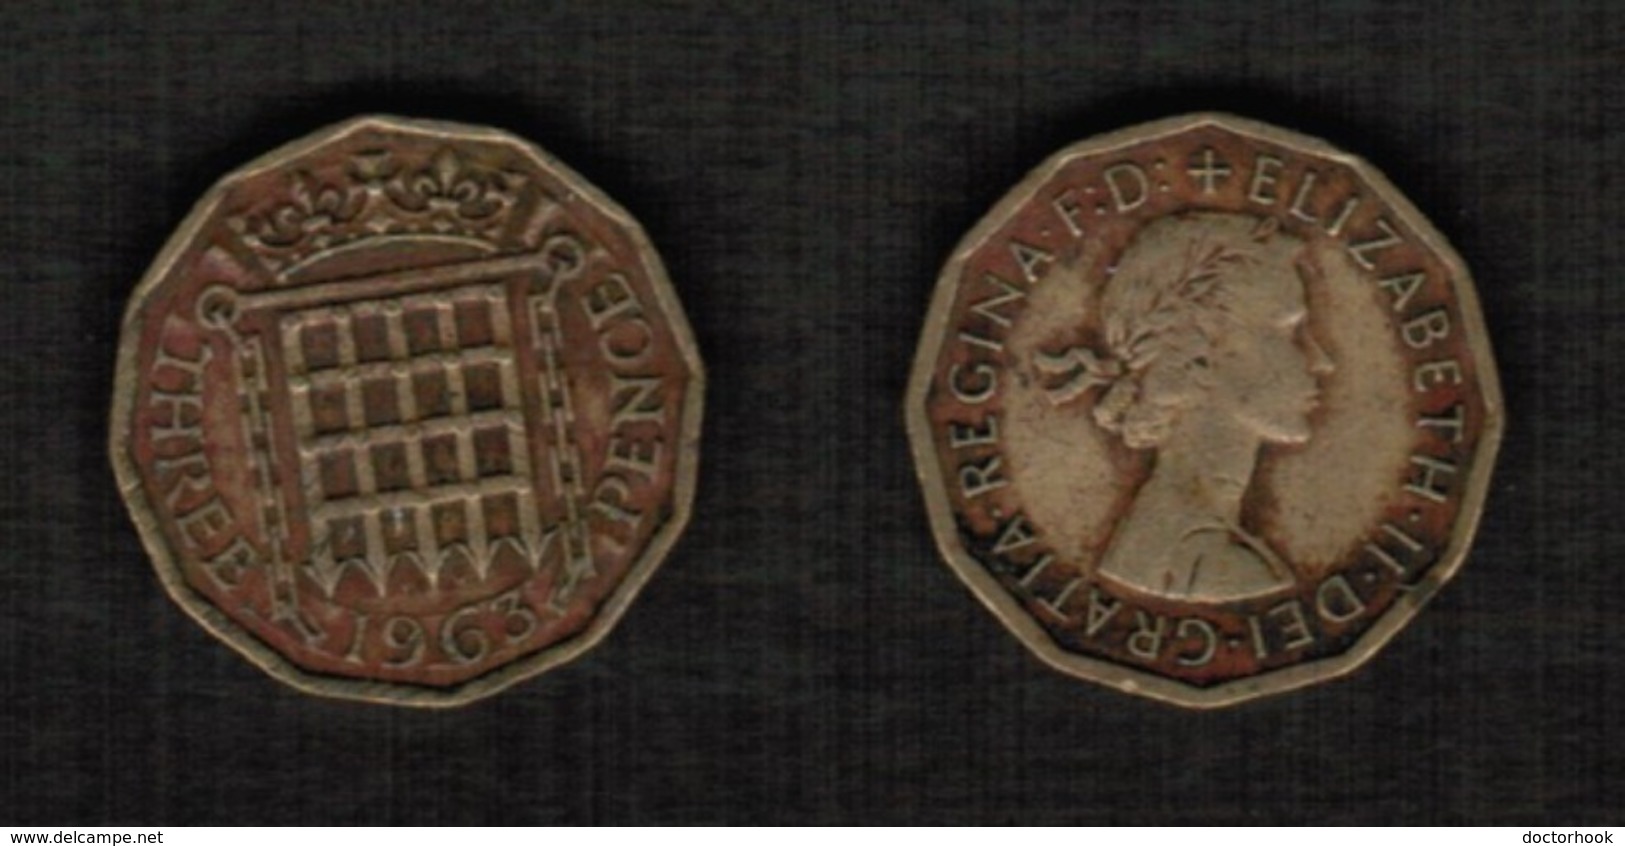 GREAT BRITAIN  3 PENCE 1963 (KM # 900) #5561 - F. 3 Pence